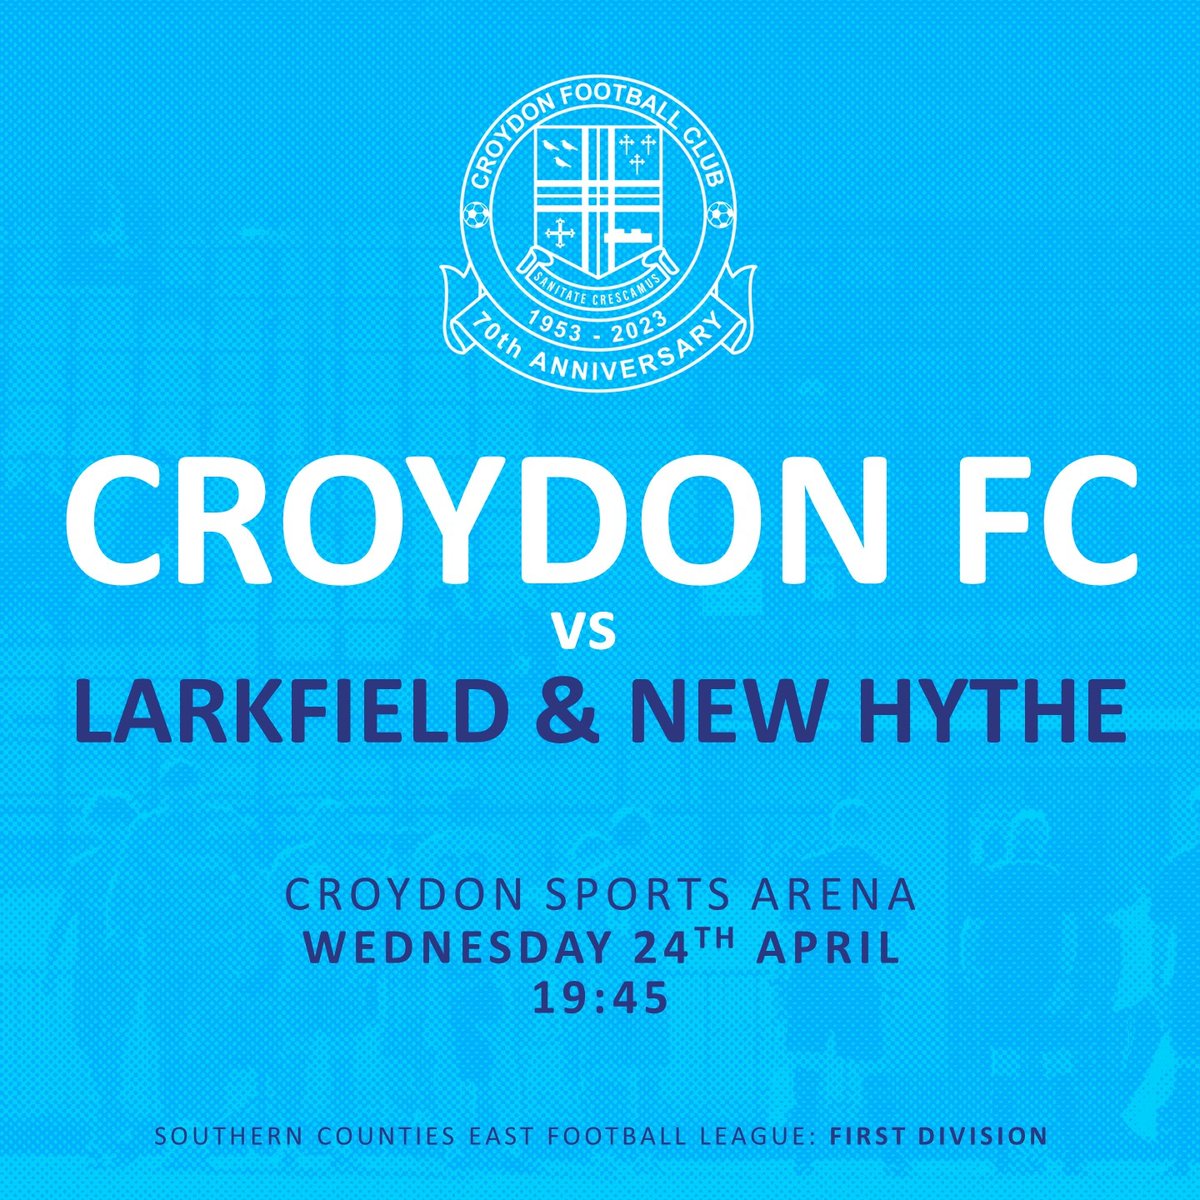 NEXT FIXTURE: @croydon_fc vs @lnhfc1961 in the League

HOME at Croydon Sports Arena SE25 

Wednesday 24th April at 7.45pm, £7 on gate

COME & SUPPORT YOUR CUP WINNING TRAMS !!..

We are Croydon FC

#trams
#croydon
#nonleaguefootball
#wearecroydon